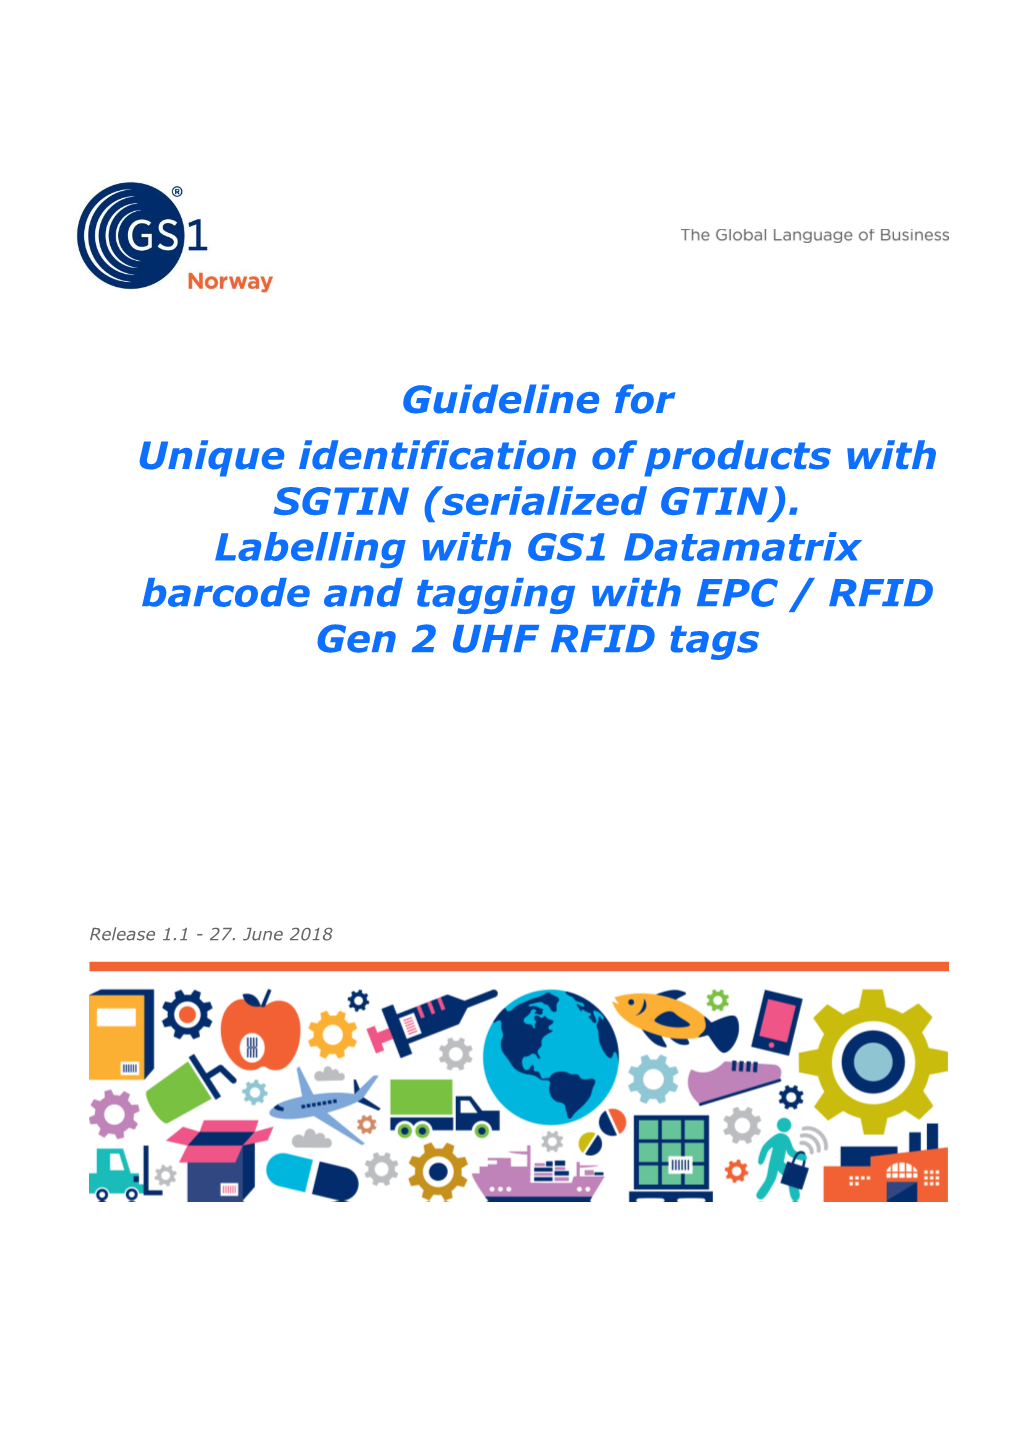 GS1 Guideline for Unique Identification of Products In